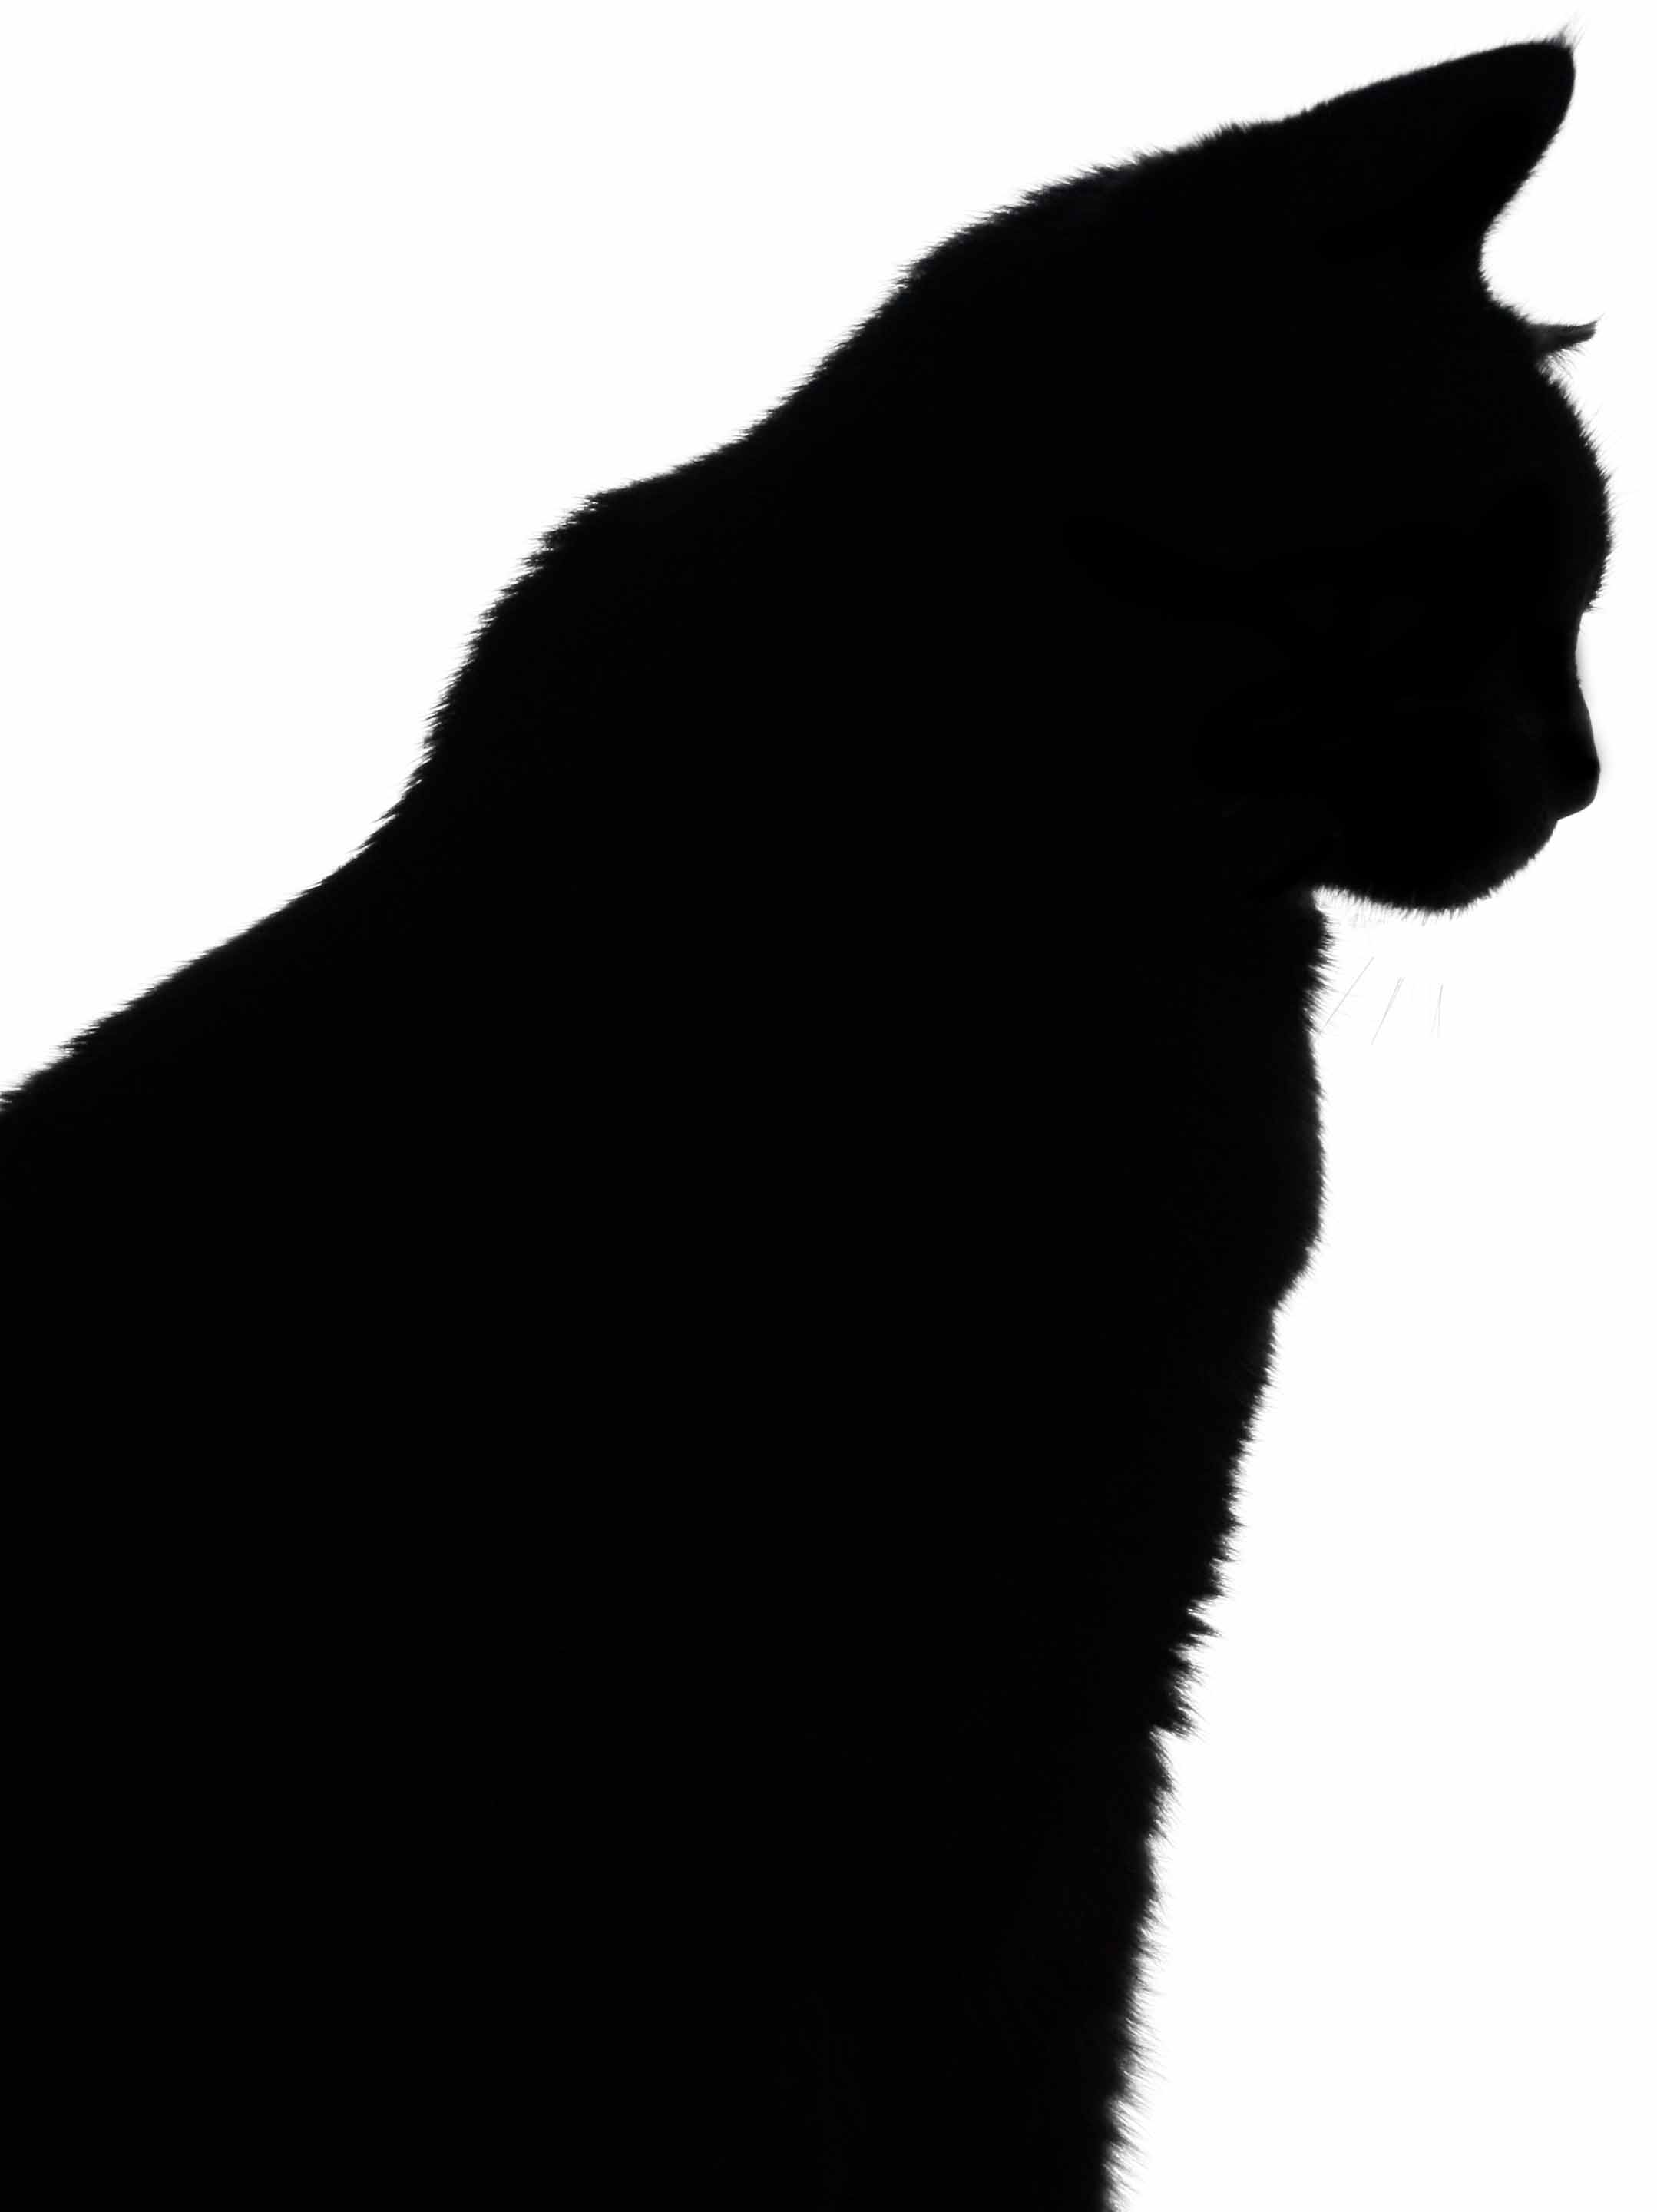 Free Cat Silhouette Images, Download Free Cat Silhouette Images png